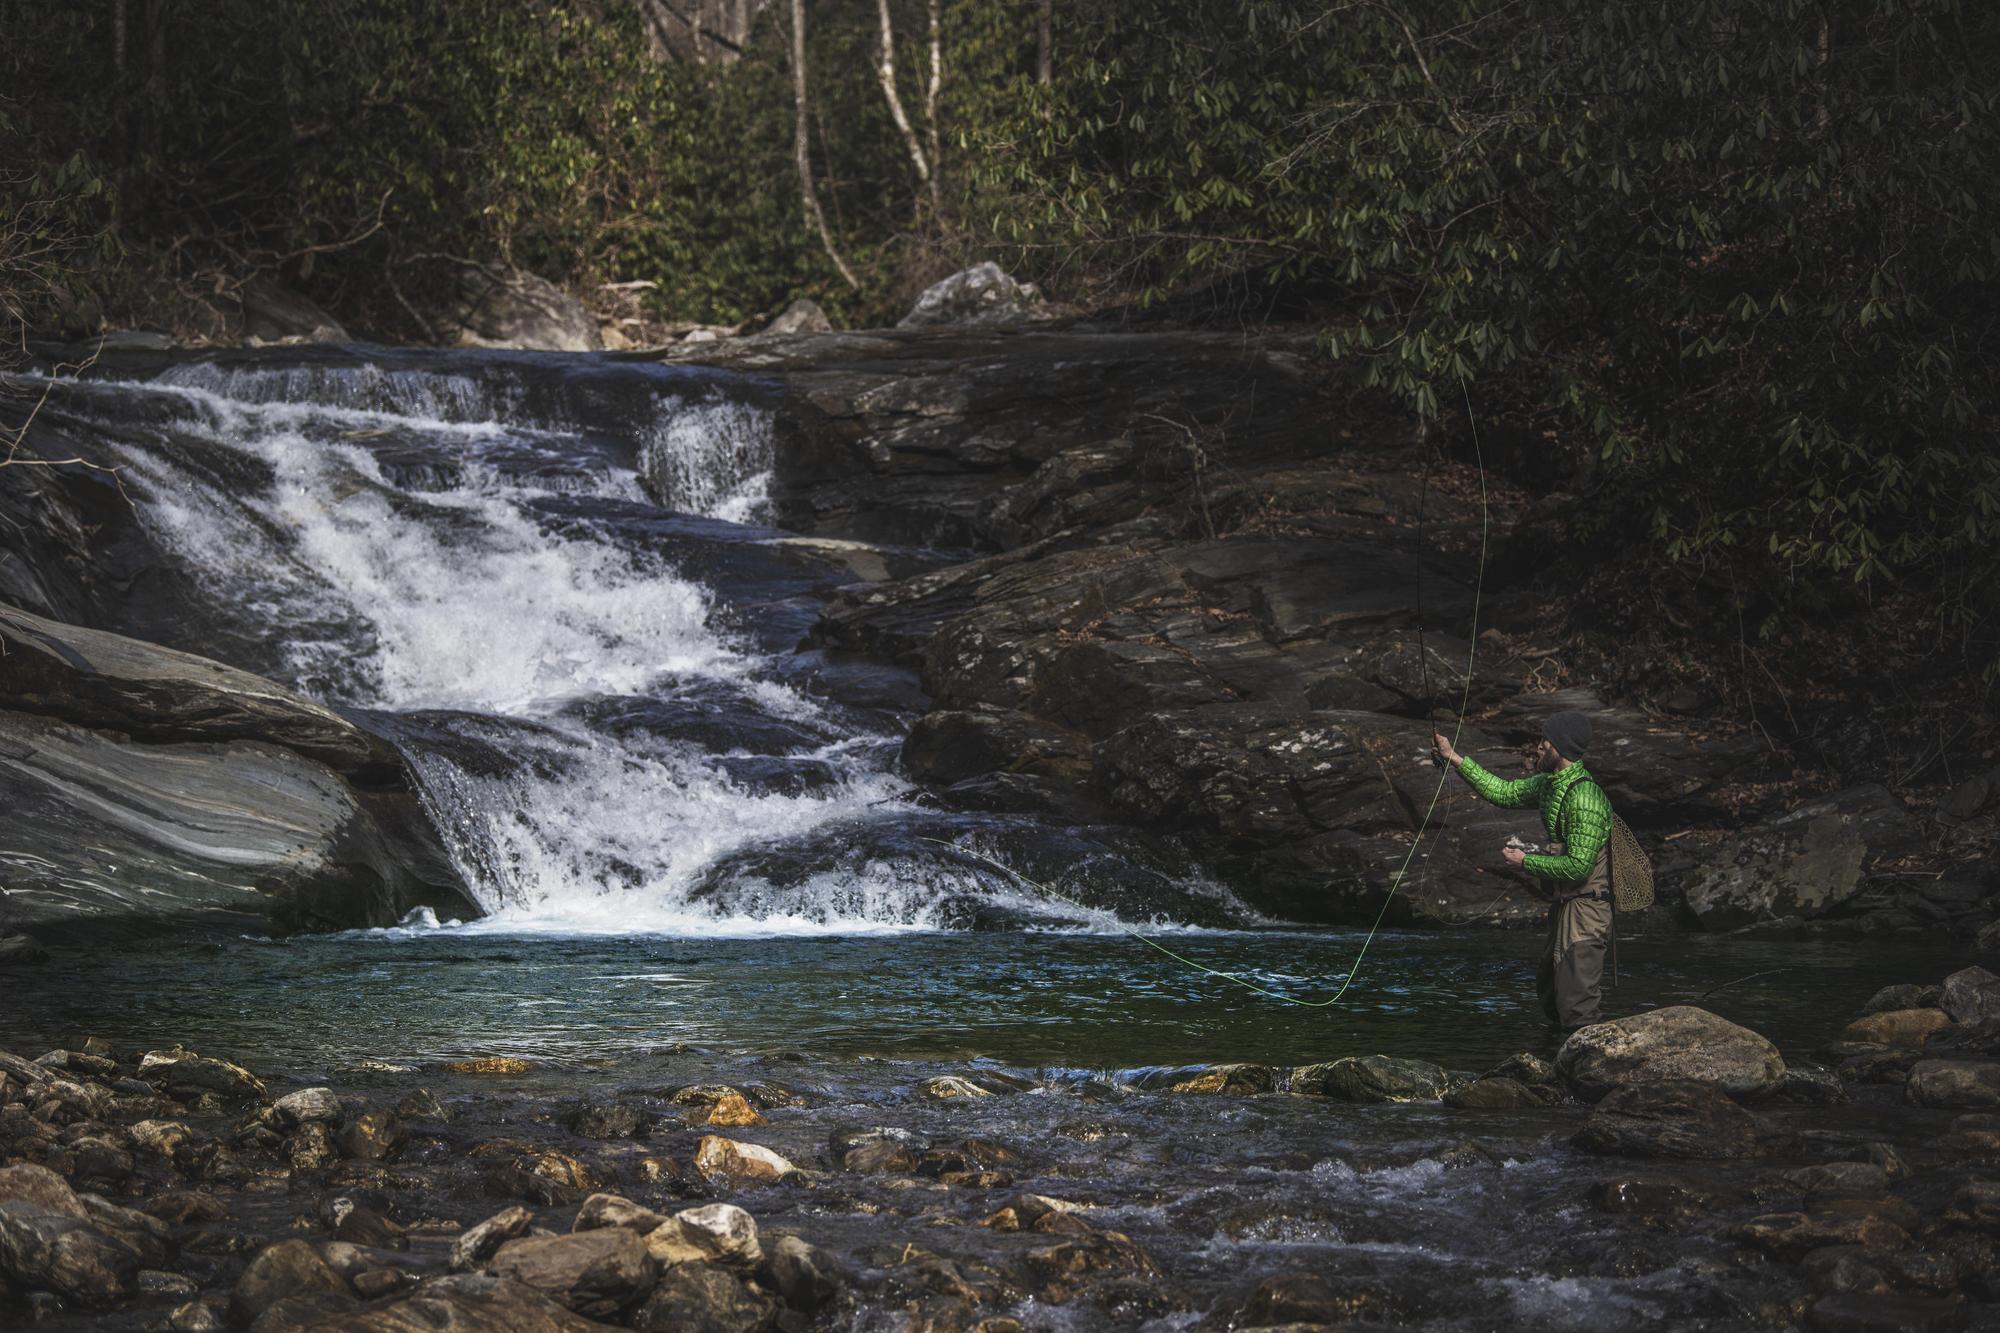 Fly fishing in the Pisgah National Forest